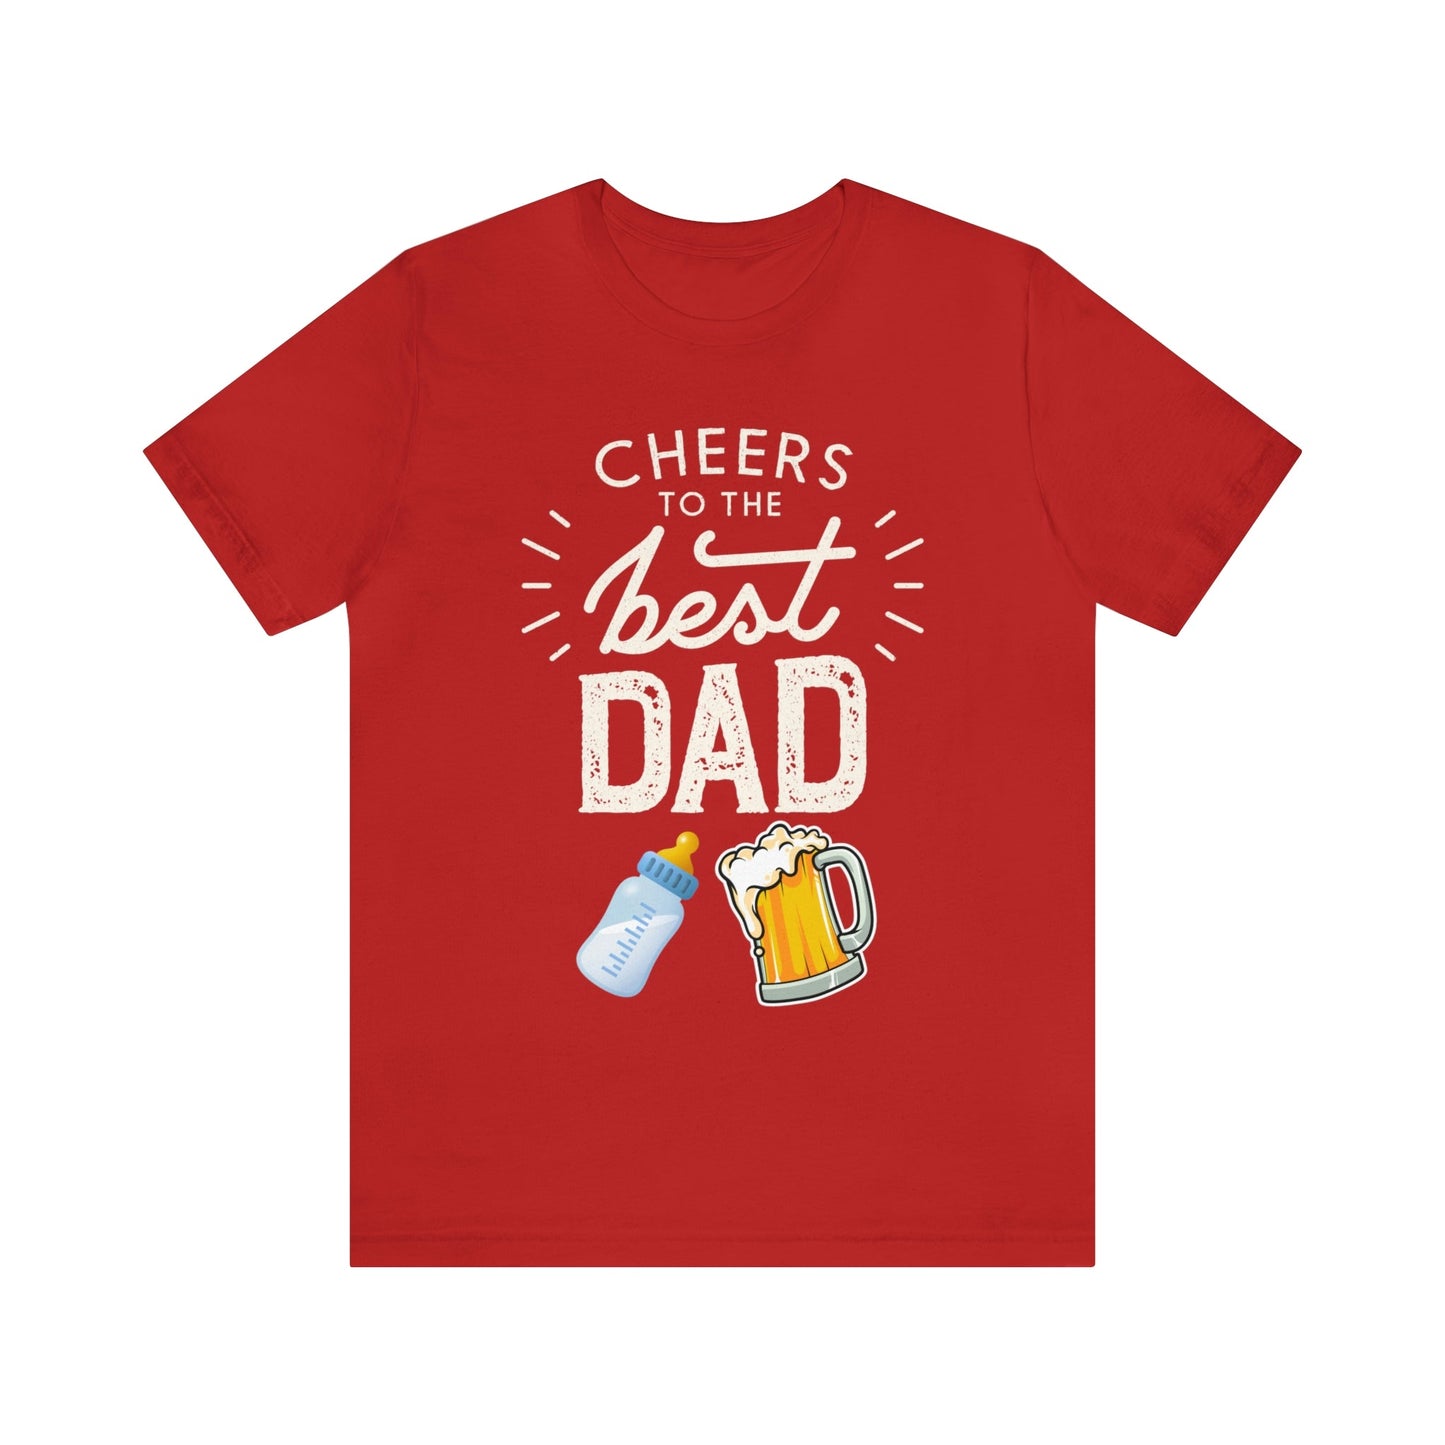 Cheers to The Best DAD T-Shirt-T-Shirt-Red-S-mysticalcherry